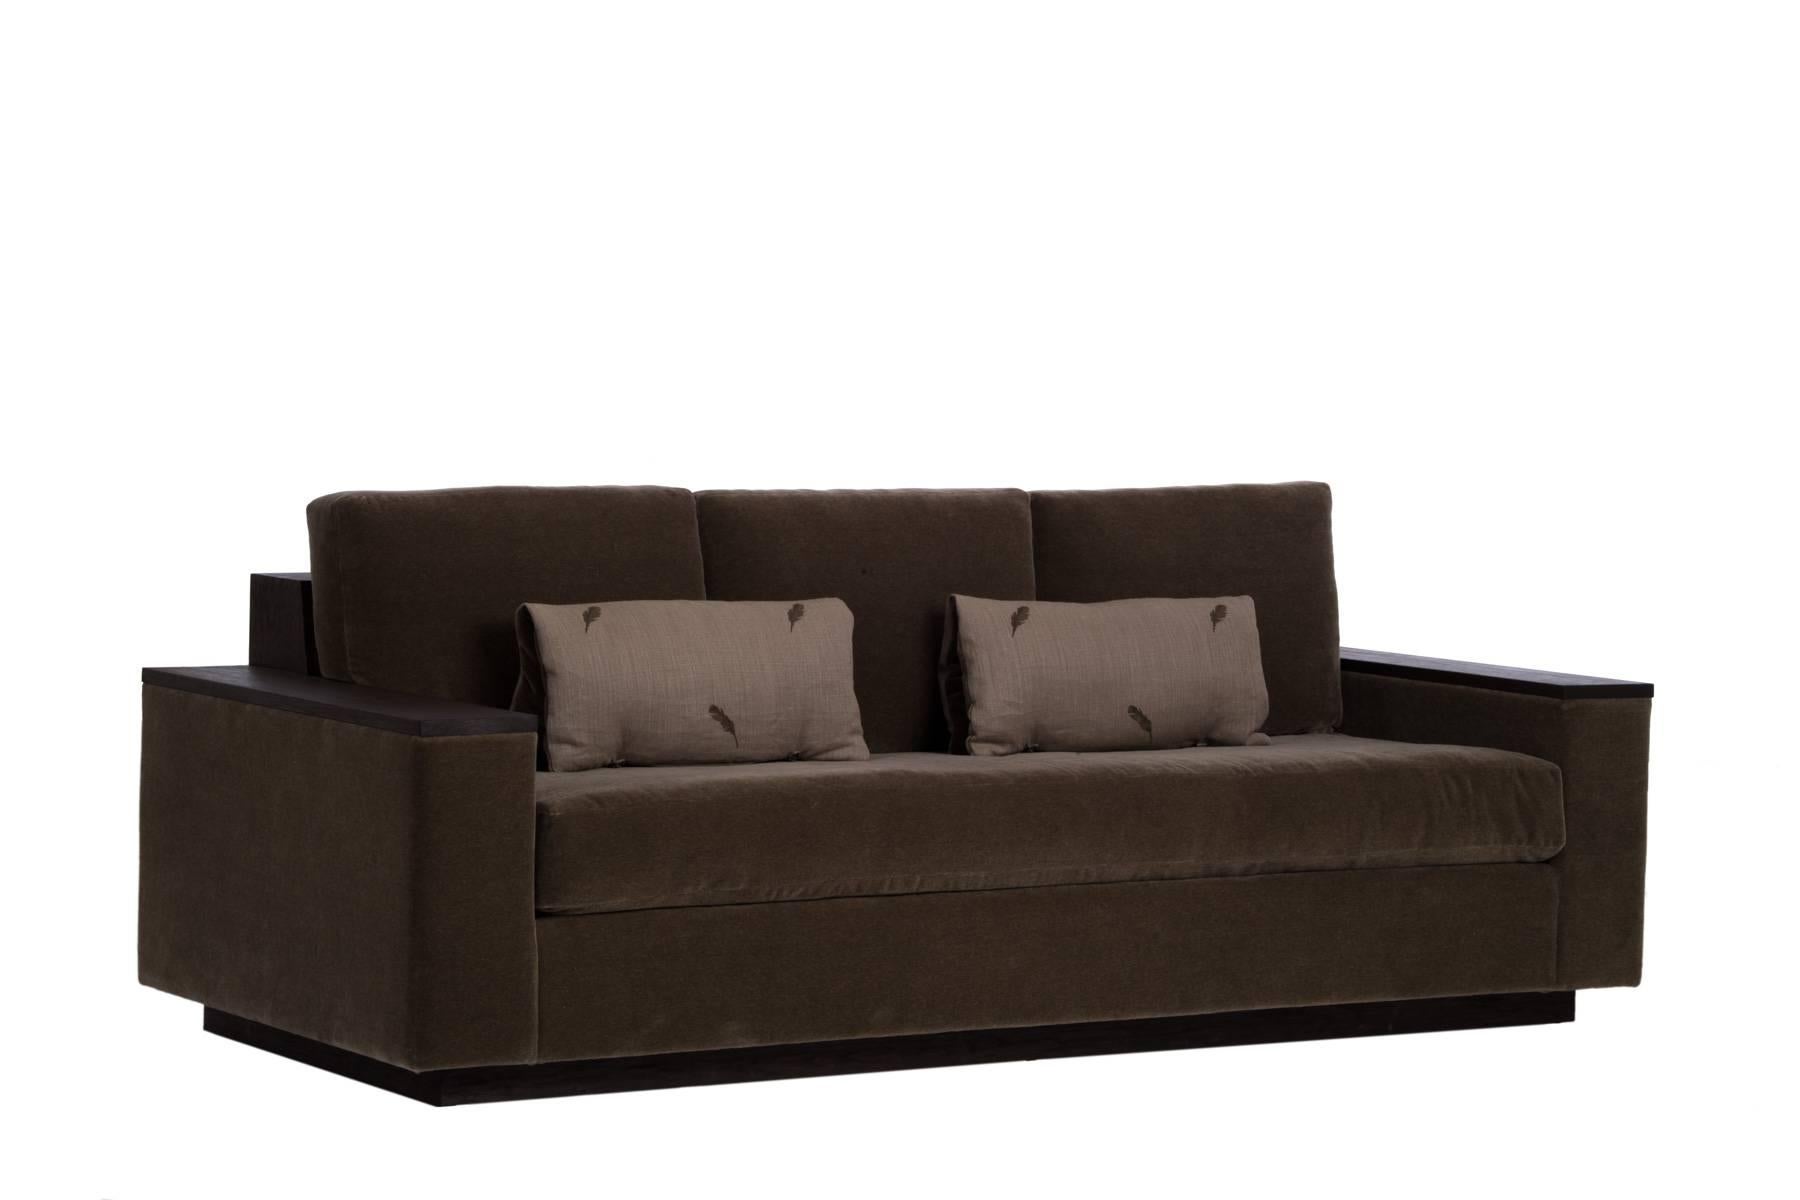 Designed by Ashley Yeates, handmade in the United States, the mohair Bolton sofa is perfect for comfort and entertaining. The North American cherry hardwood surfaces are ideal for resting a fine wine or media device. A must have for a small space